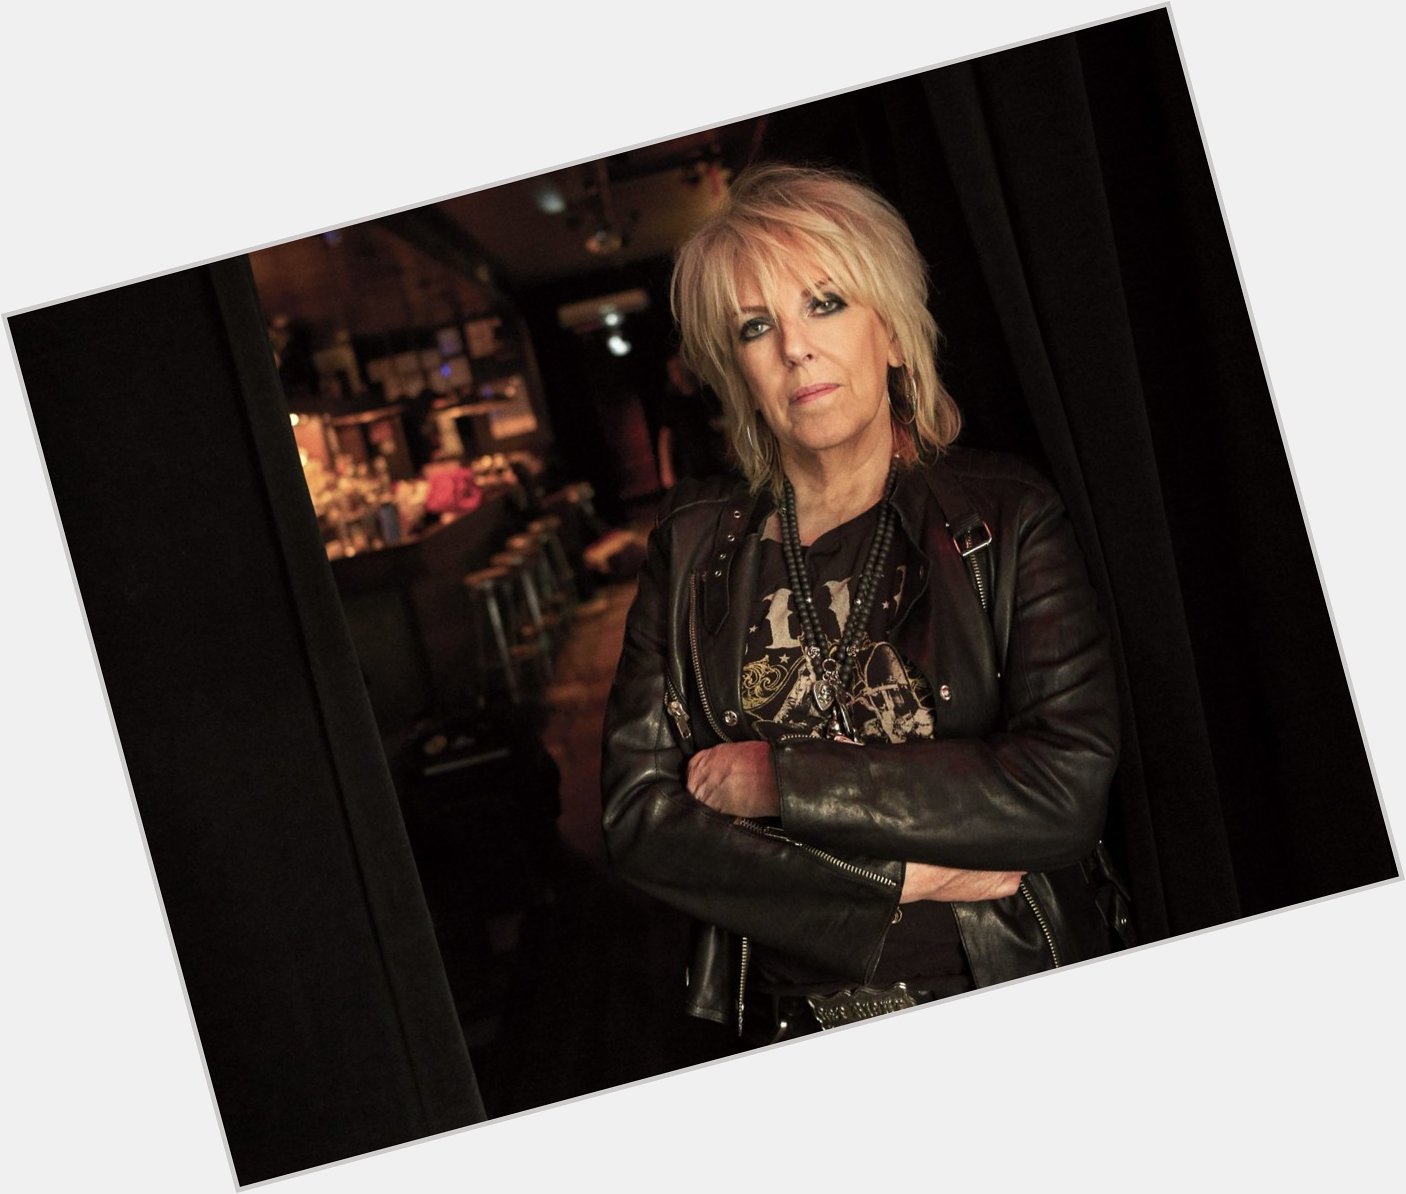 Please join me here at in wishing the one and only Lucinda Williams a very Happy Birthday today  